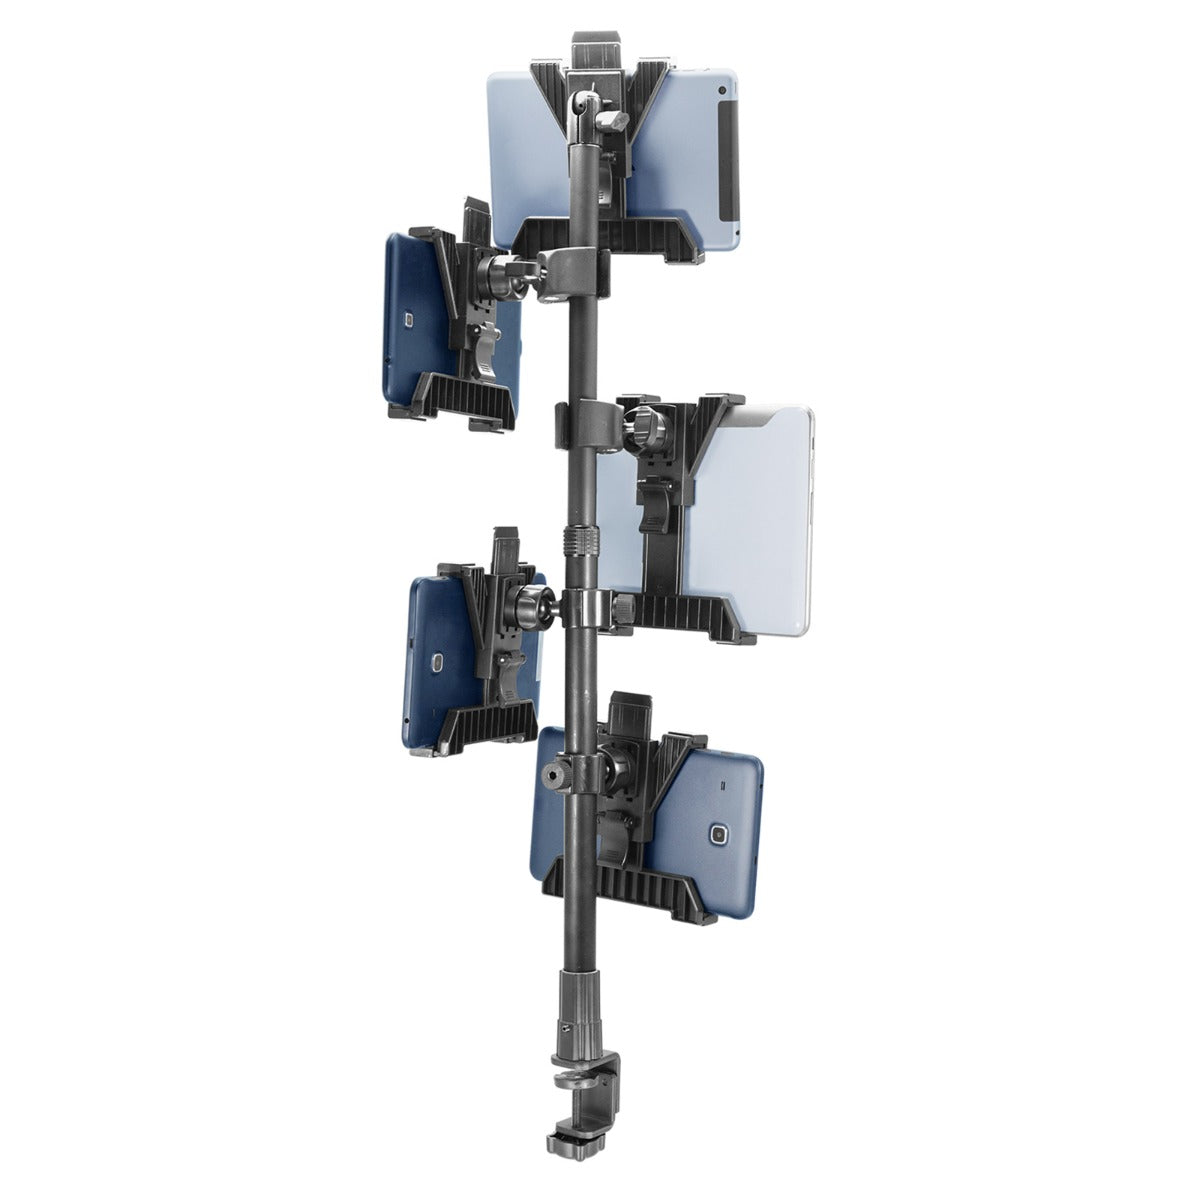 iBOLT Tablet Tower- TabDock™ POS Clamp Mount - with 5 Tablet Holders